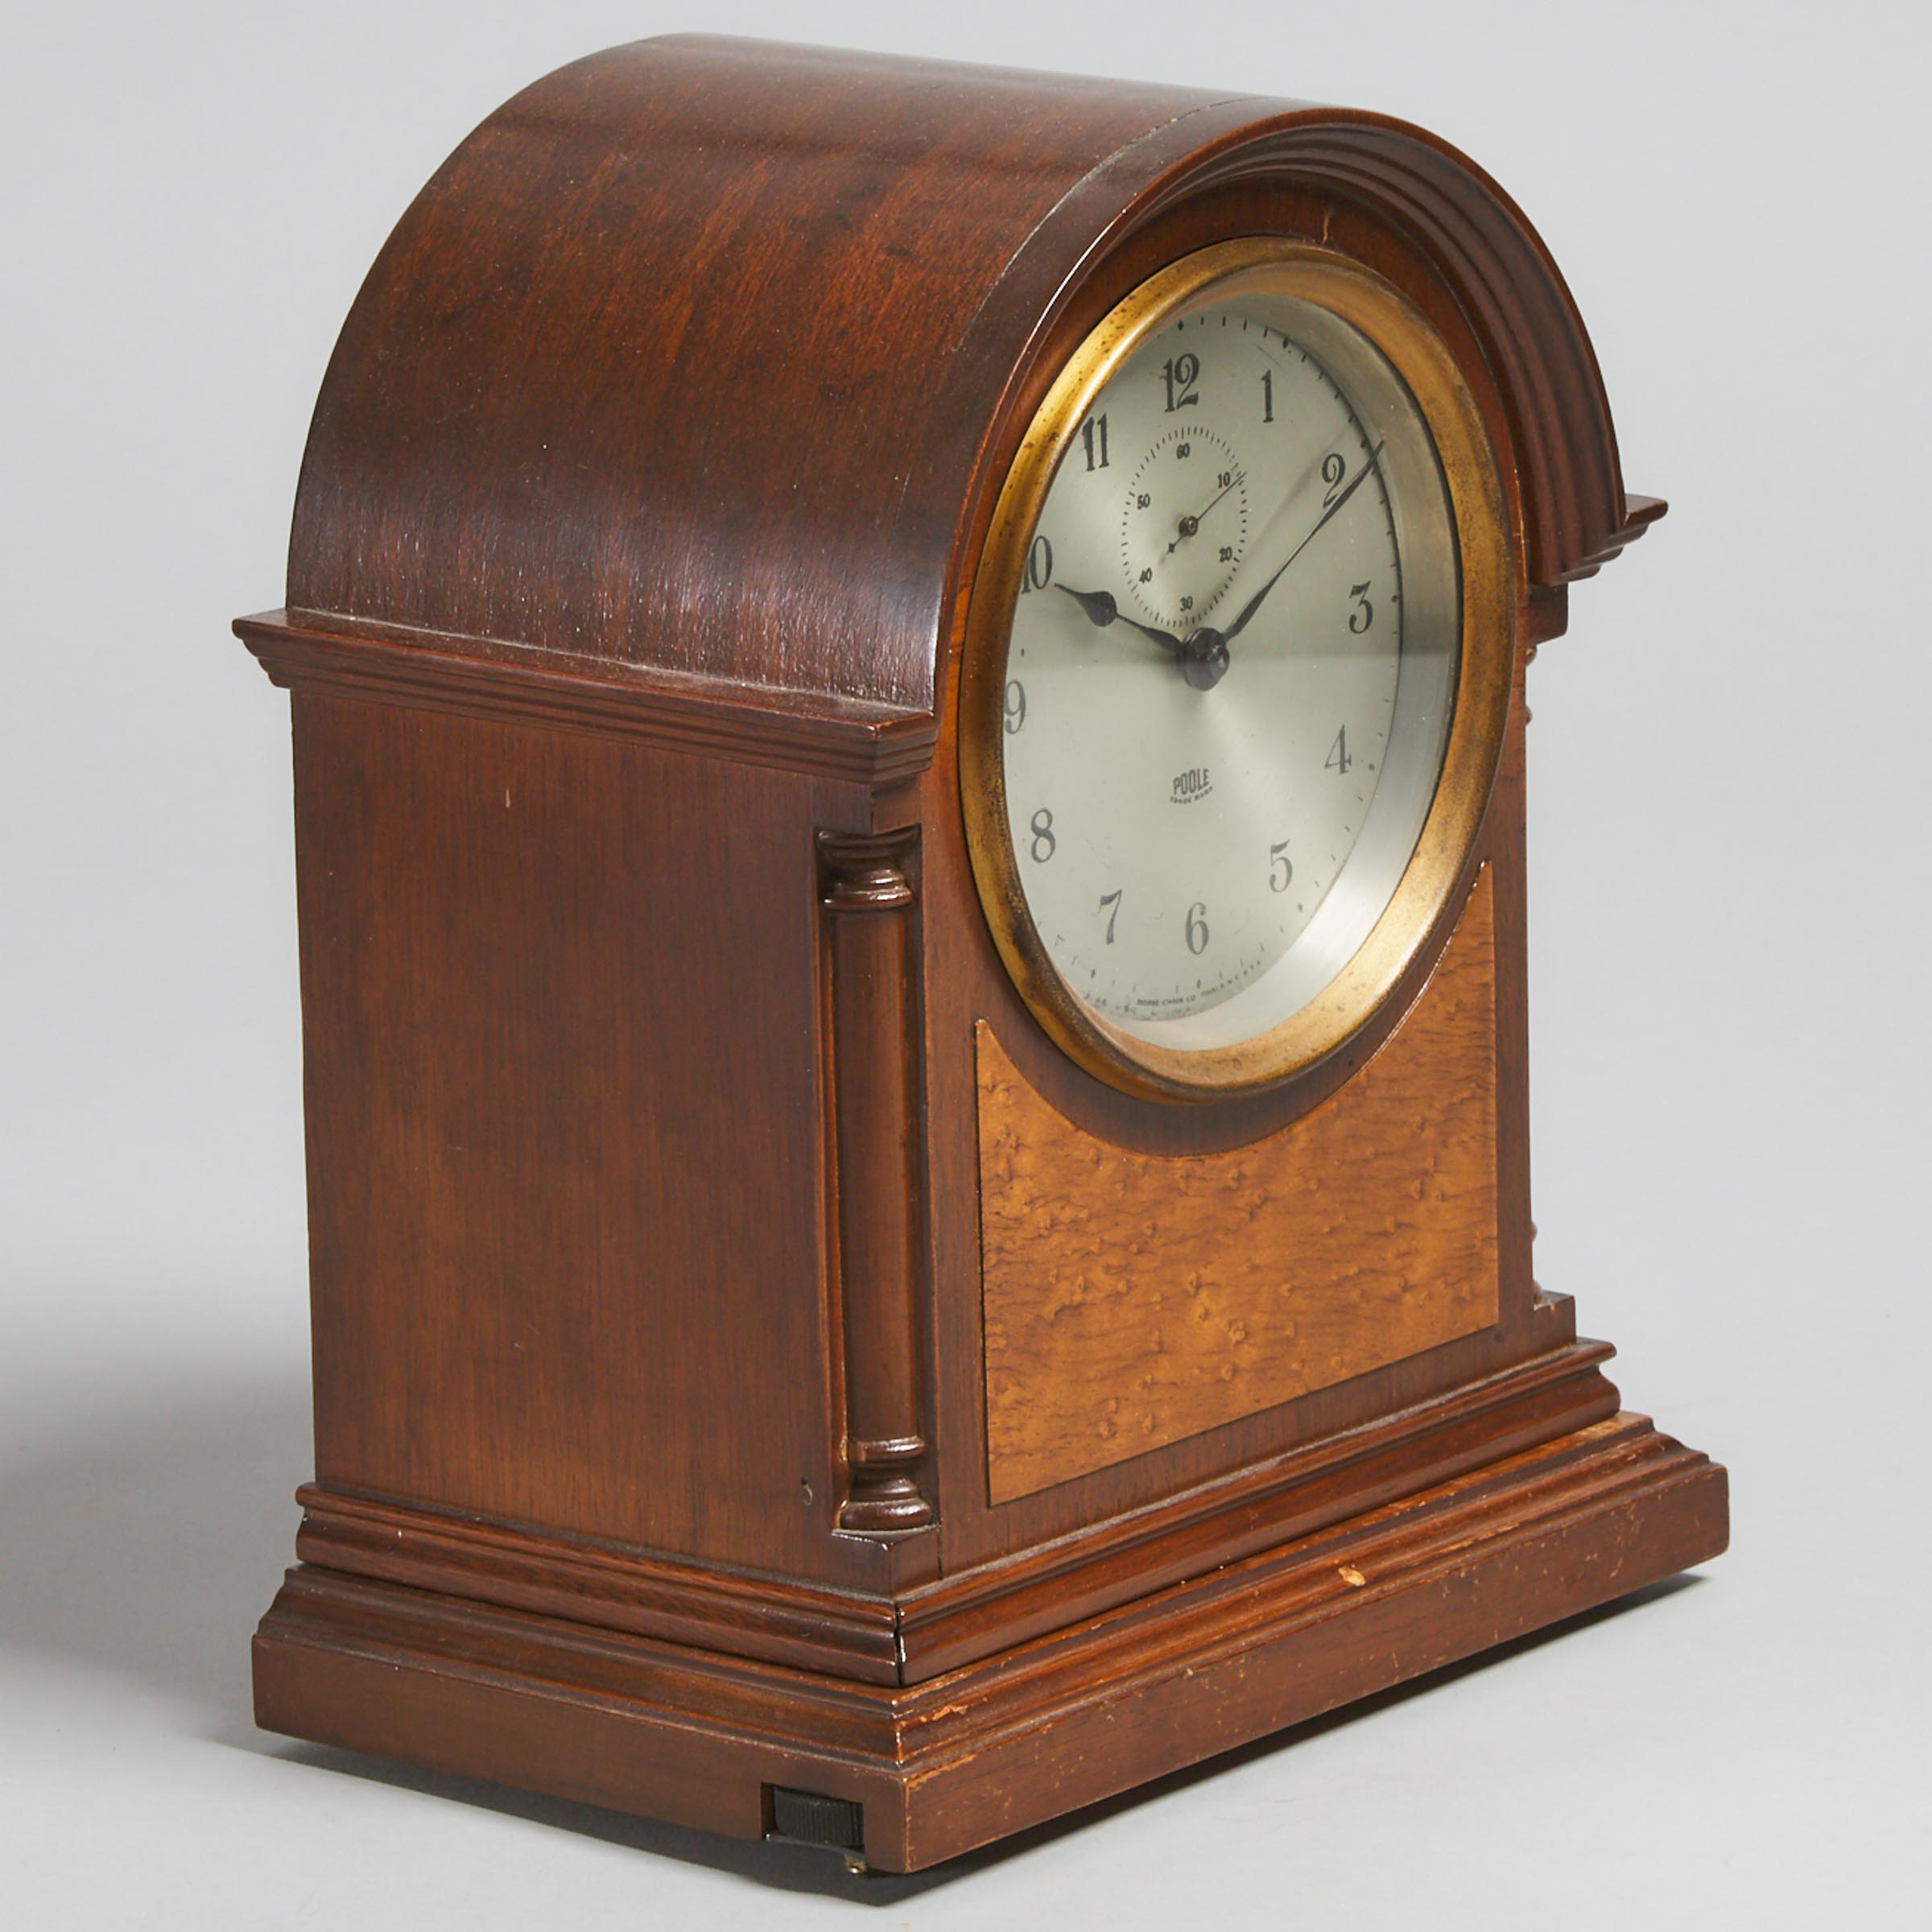 American Electric Table Clock, Poole Mfg. Co., Ithaca NY, c.1930